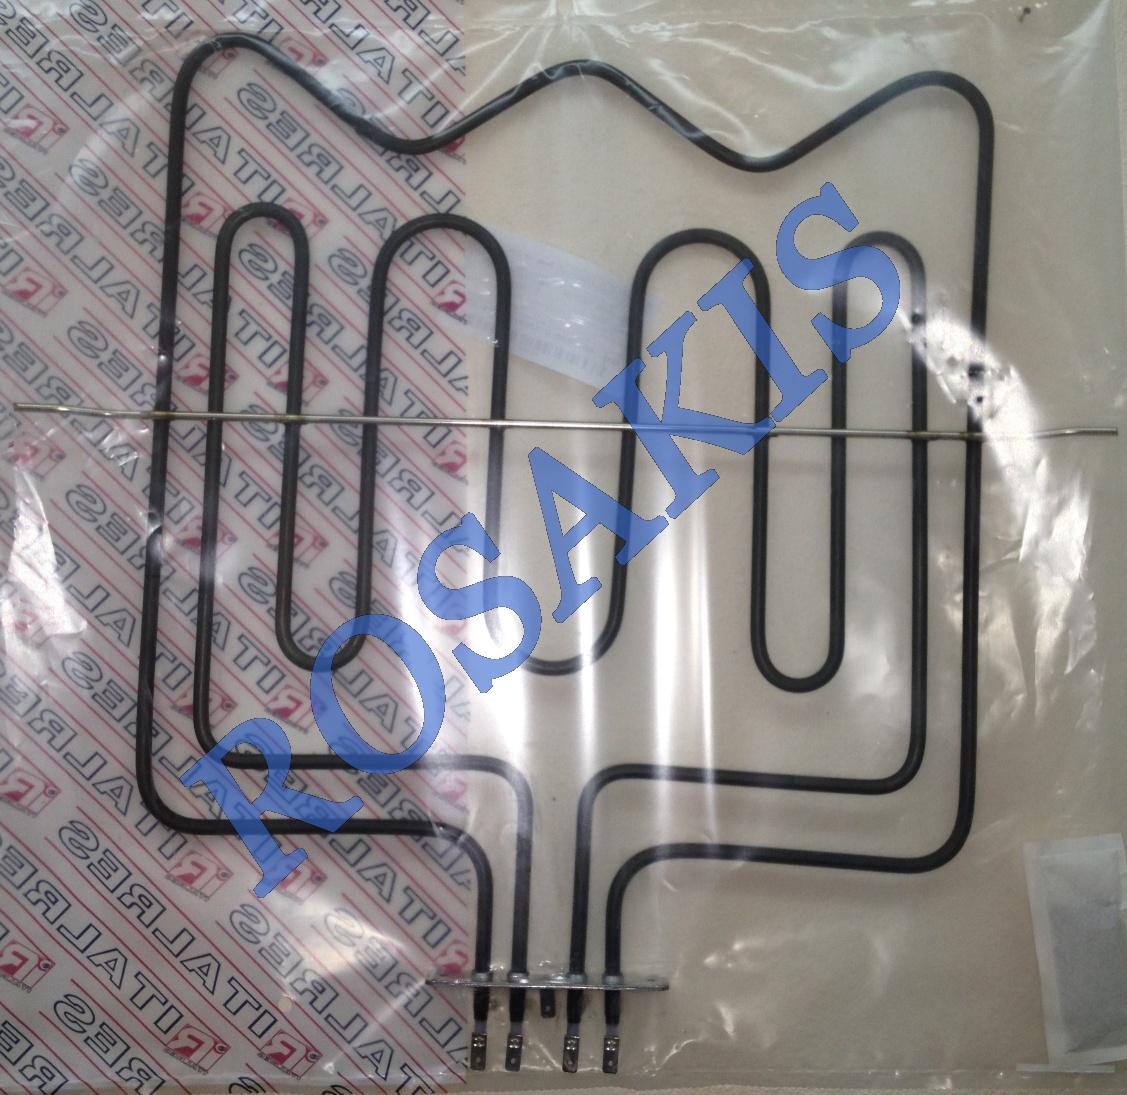 COOKER HEATING ELEMENT GRIL UP PART CONTI 1000/2000W ITALIAN